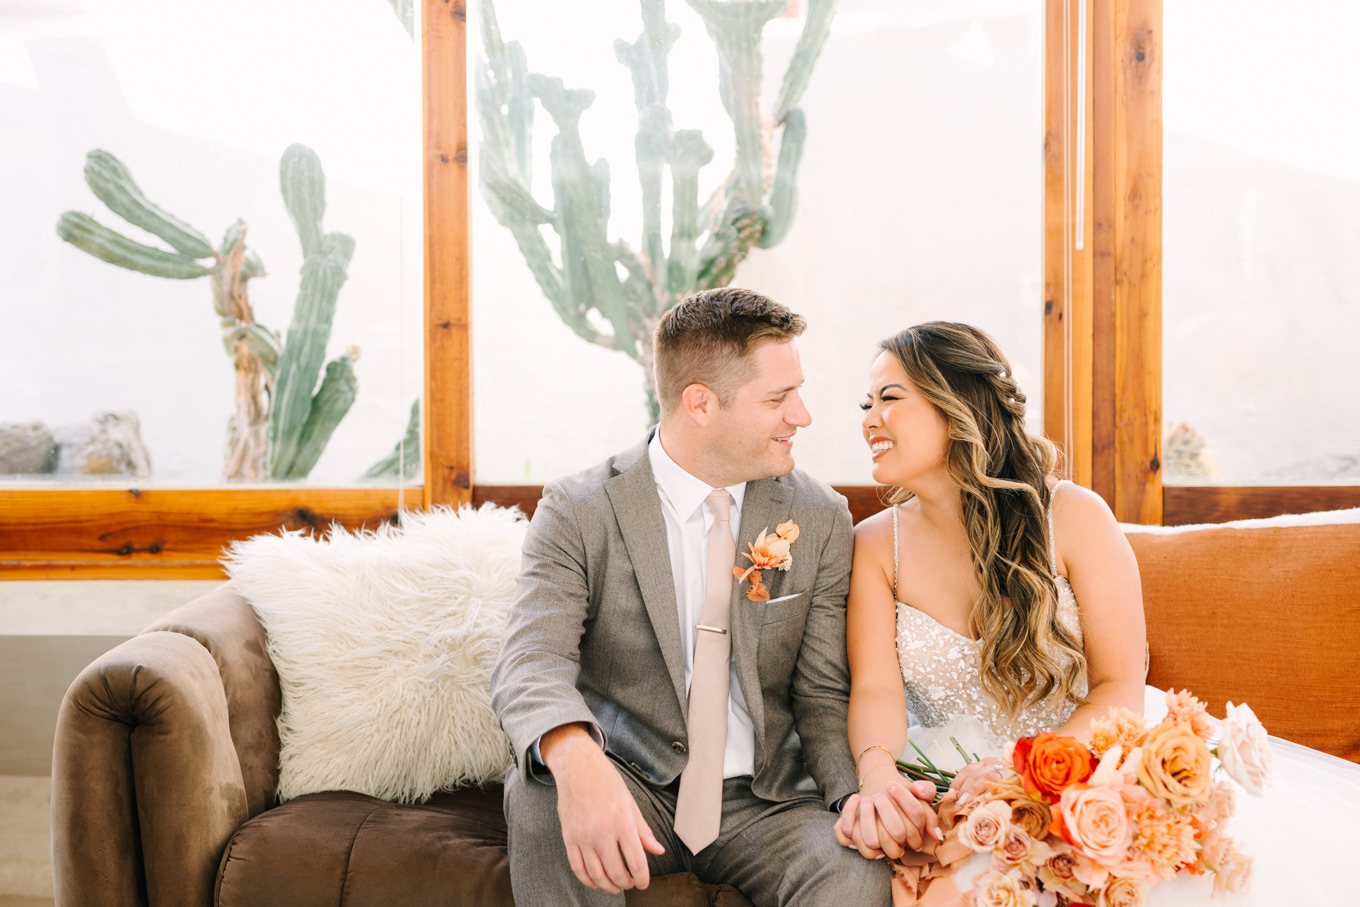 Bride and groom before ceremony | Pink and orange Lautner Compound wedding | Colorful Palm Springs wedding photography | #palmspringsphotographer #palmspringswedding #lautnercompound #southerncaliforniawedding  Source: Mary Costa Photography | Los Angeles